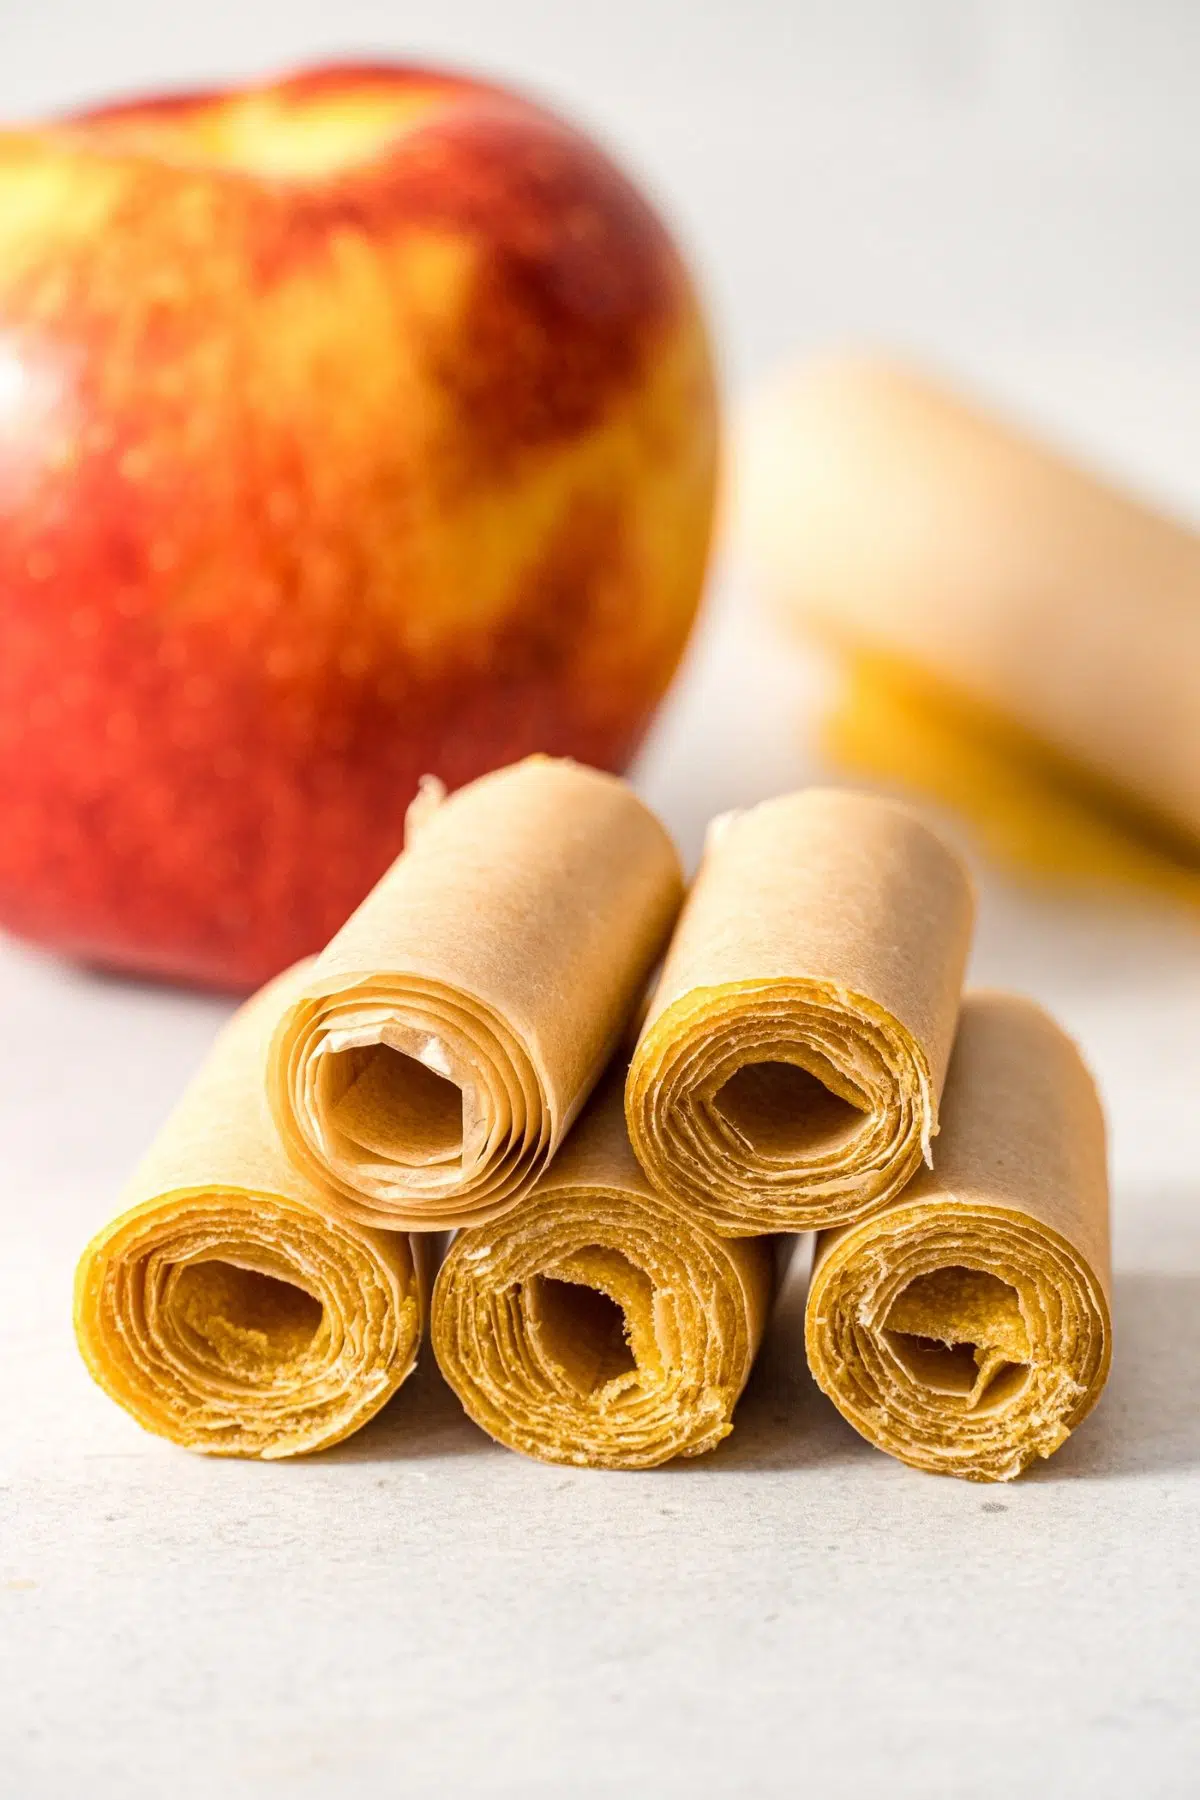 Five fruit rolls stacked in front of an apple